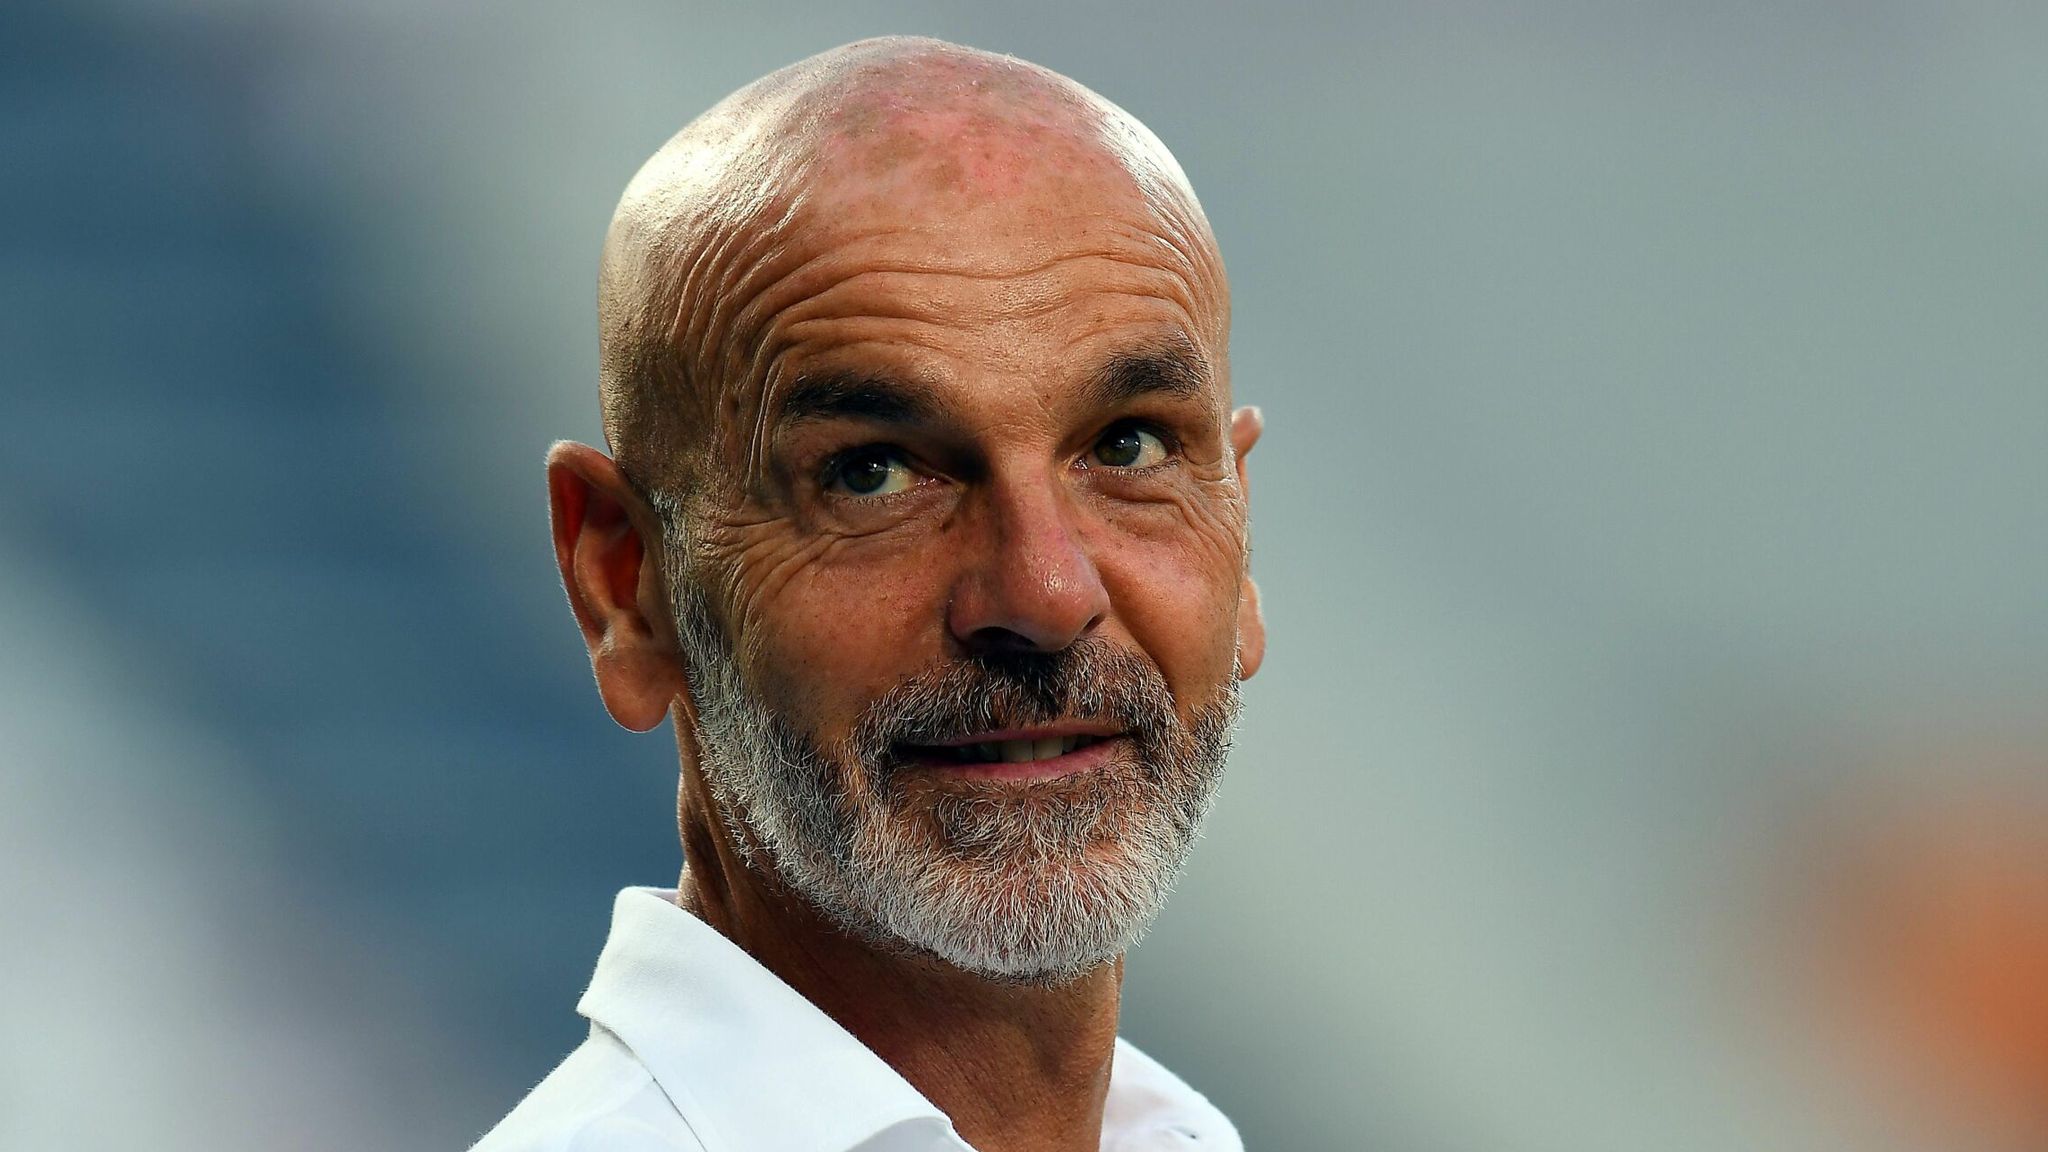 AC Milan: Stefano Pioli signs new two-year deal to remain head coach |  Football News | Sky Sports